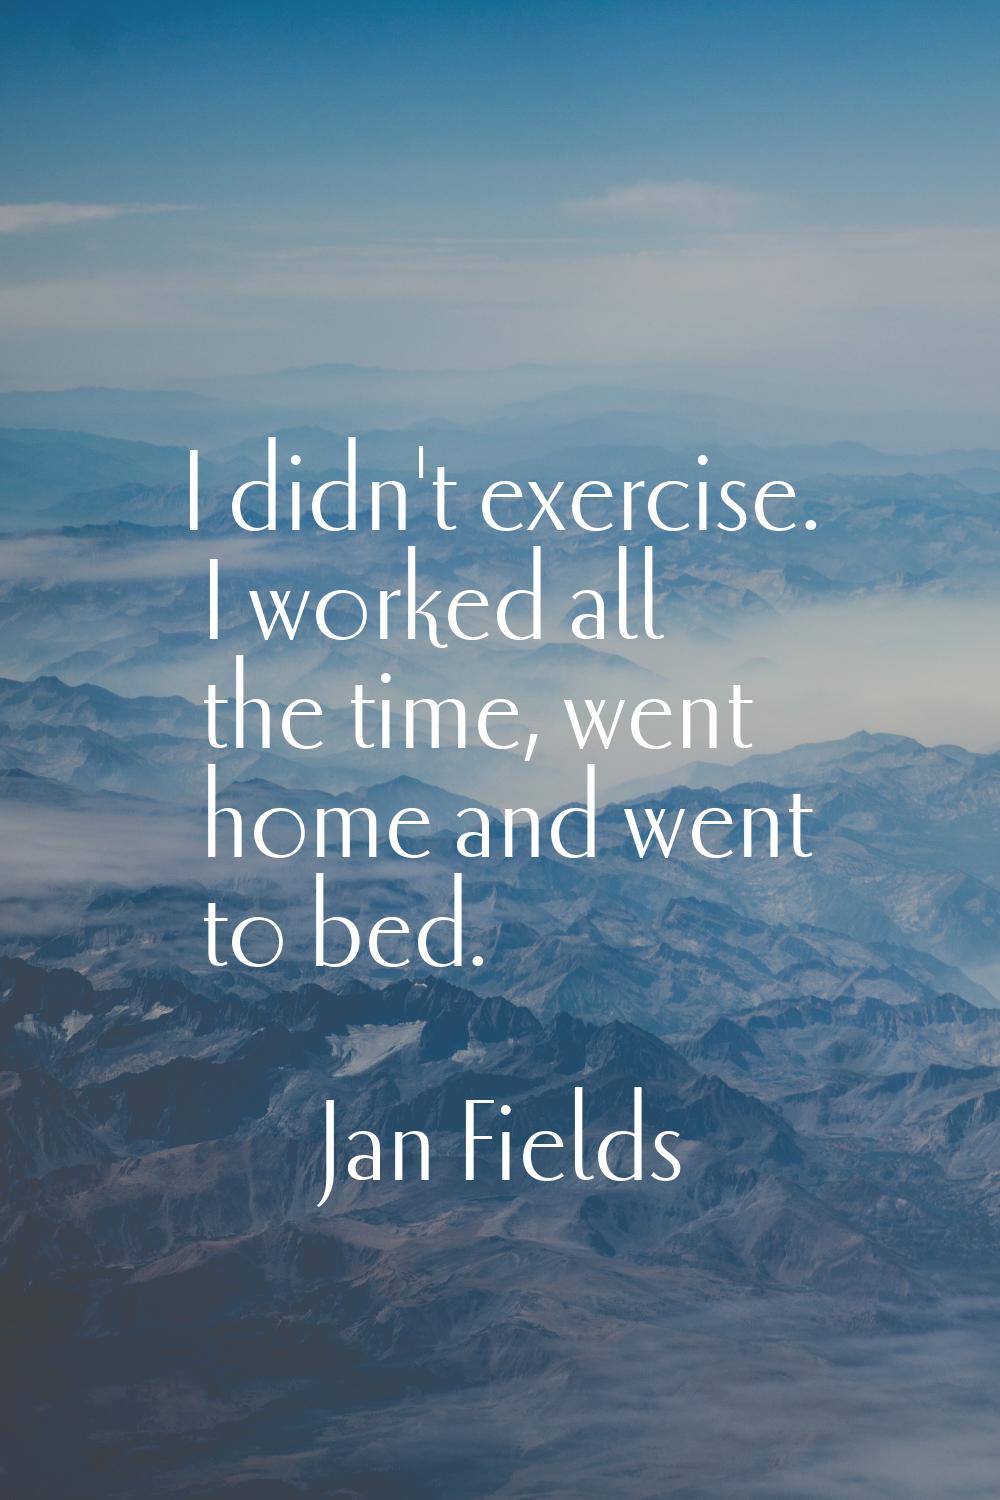 I didn't exercise. I worked all the time, went home and went to bed.